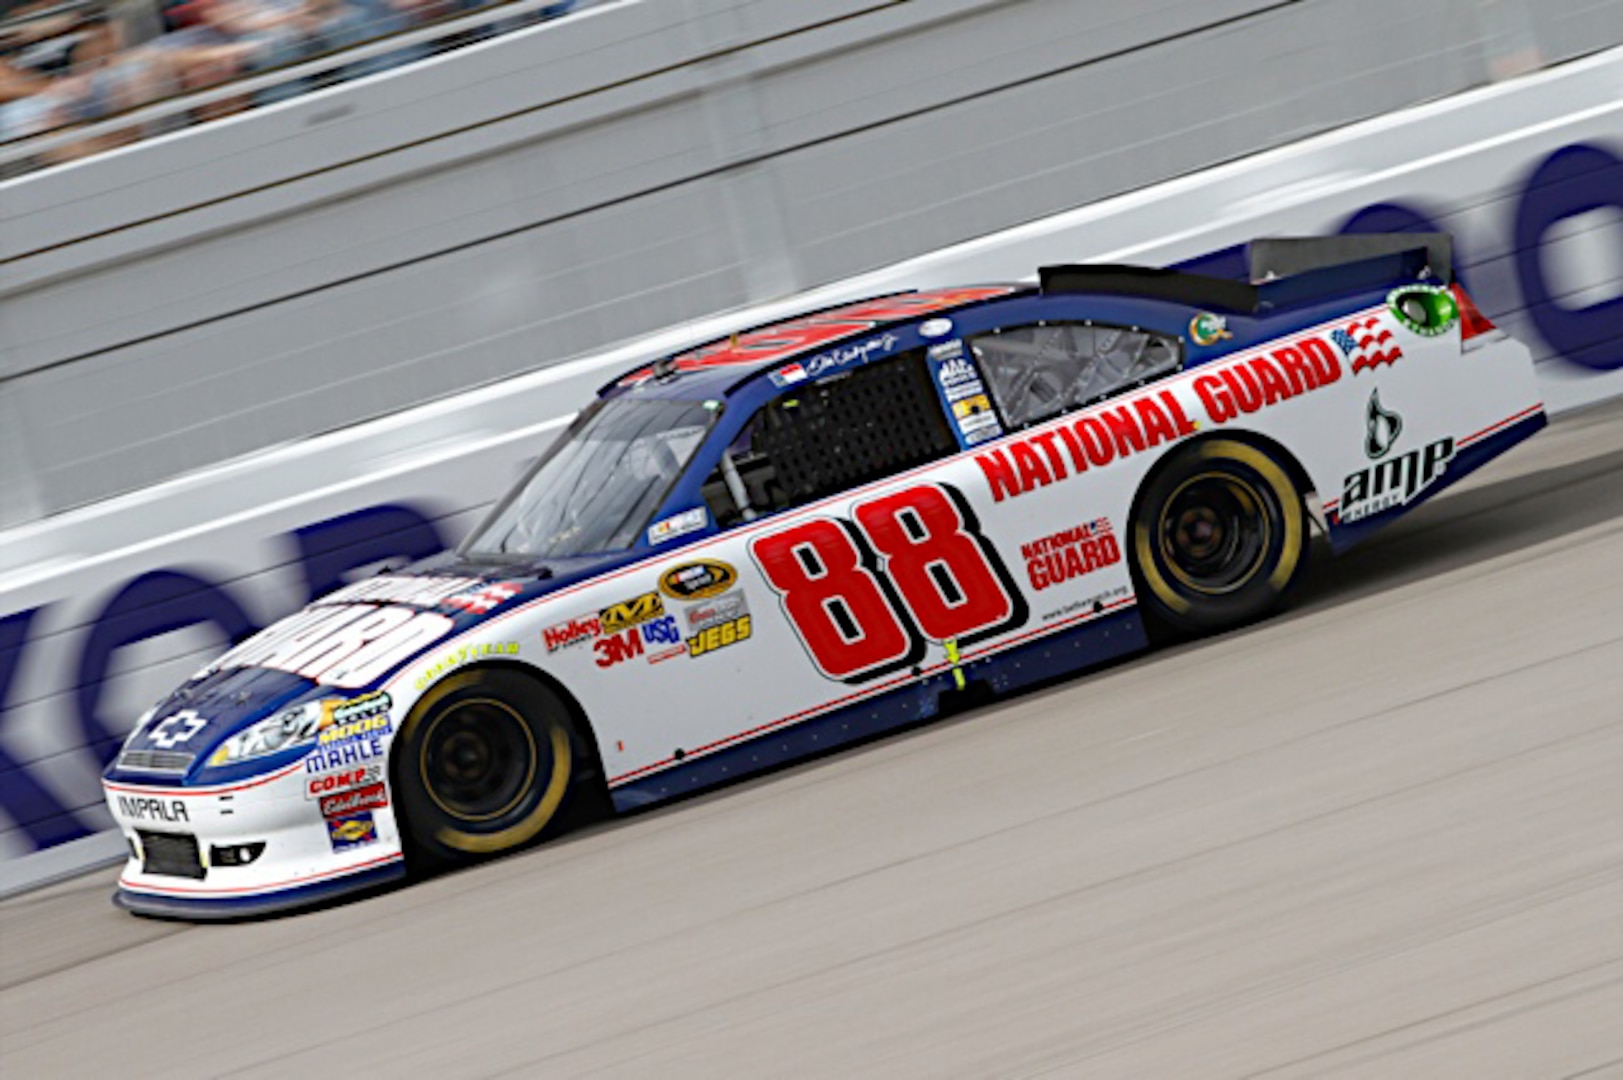 Dale Earnhardt Jr., driver of the No. 88 National Guard NASCAR racecar, speeds down the track at the Las Vegas Motor Speedway in Las Vegas, Nev., March 6, 2011. Dale Jr. finished the day with an eighth place finish, moving him into 10th place in the points race.